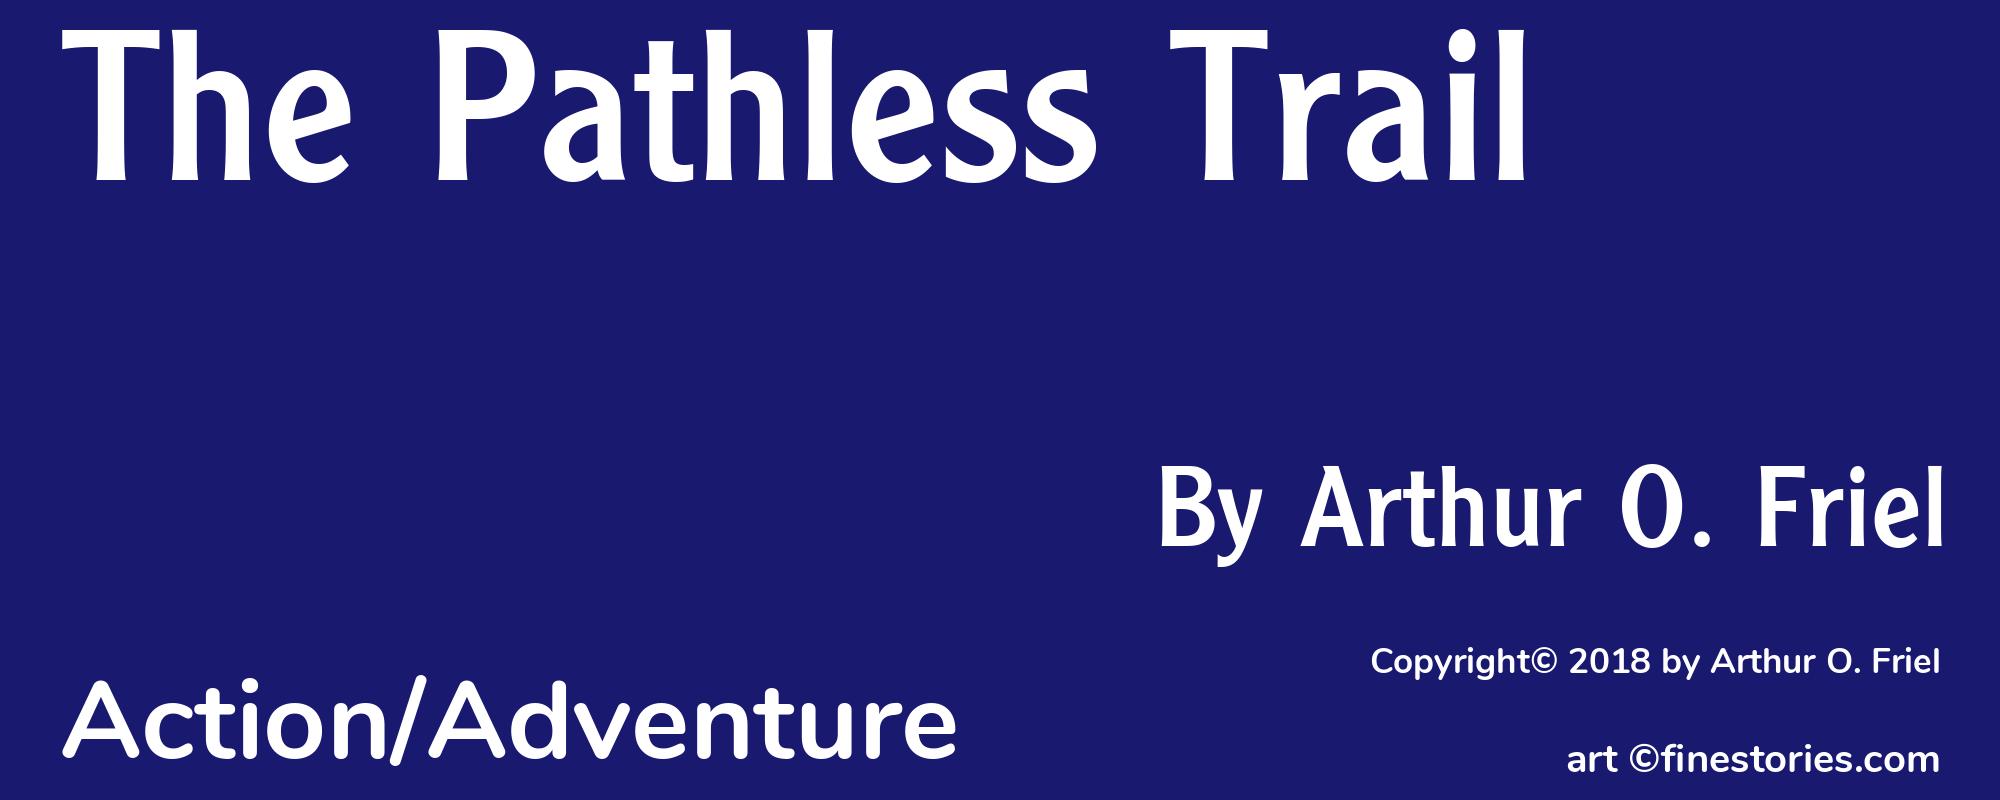 The Pathless Trail - Cover